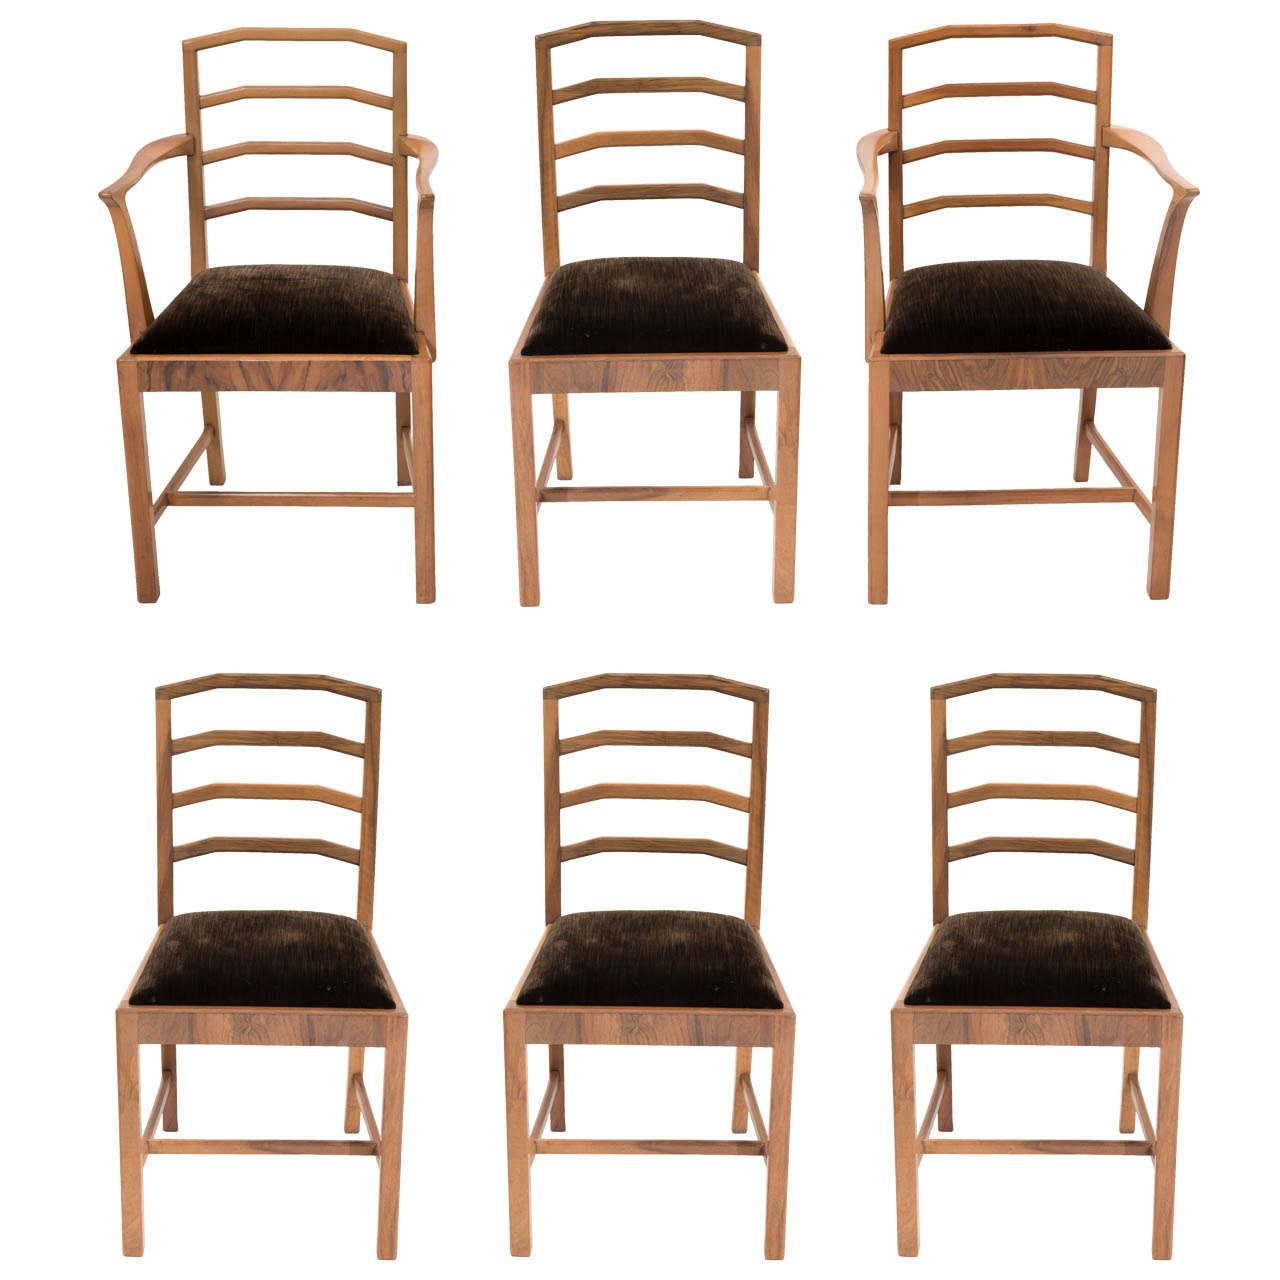 Set of Six Art Deco Ladder Back Shaped Chairs by Heals of London